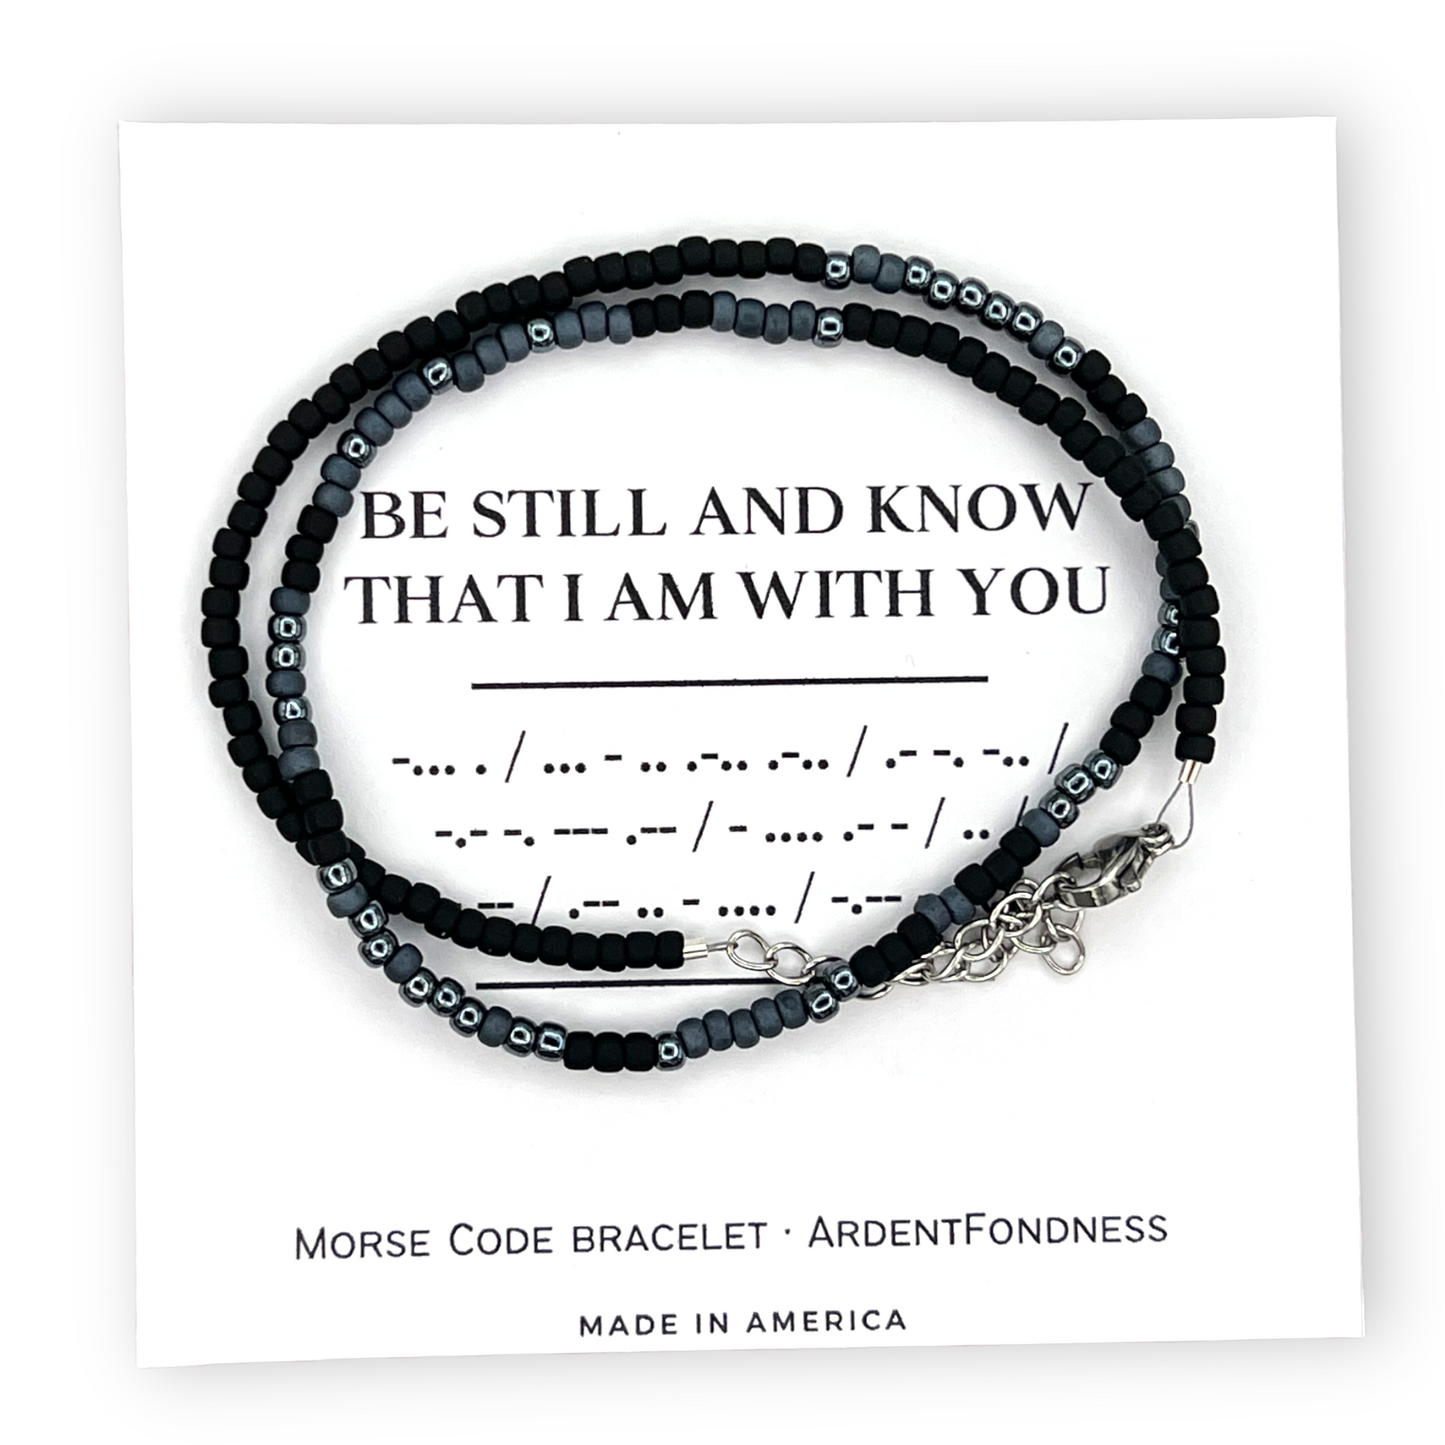 MEN'S Be still and know that I am with you Wrap Bracelet